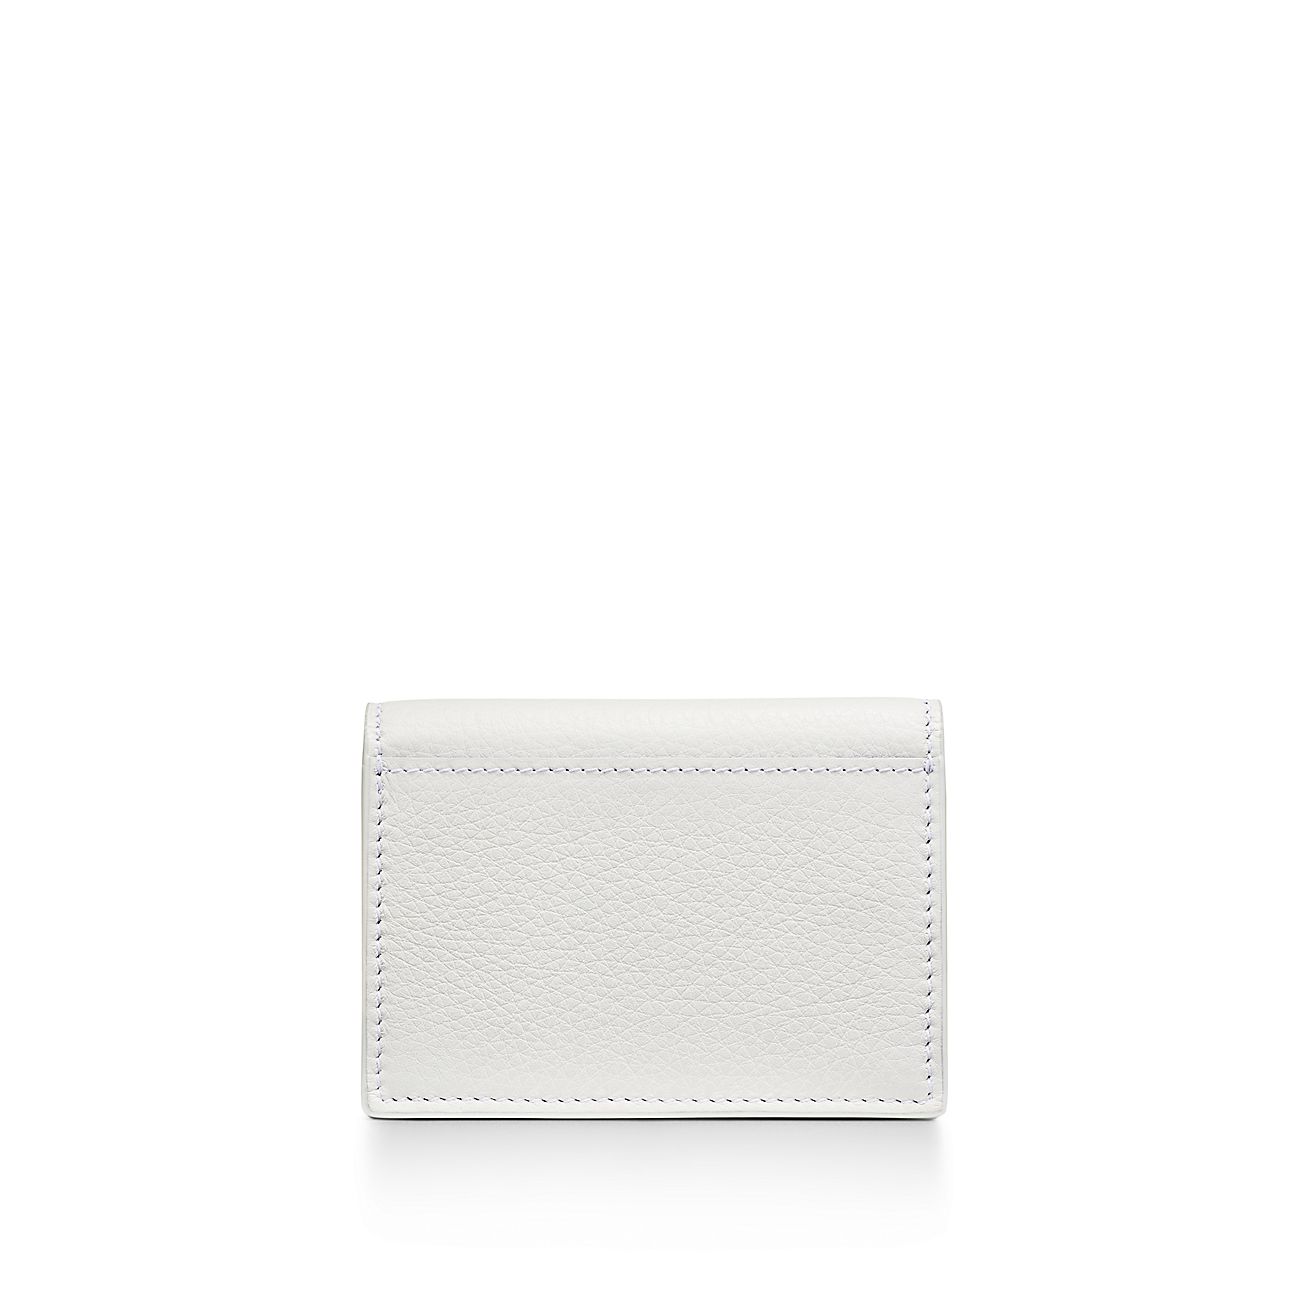 T&CO. Flap Card Holder in White Leather | Tiffany & Co.